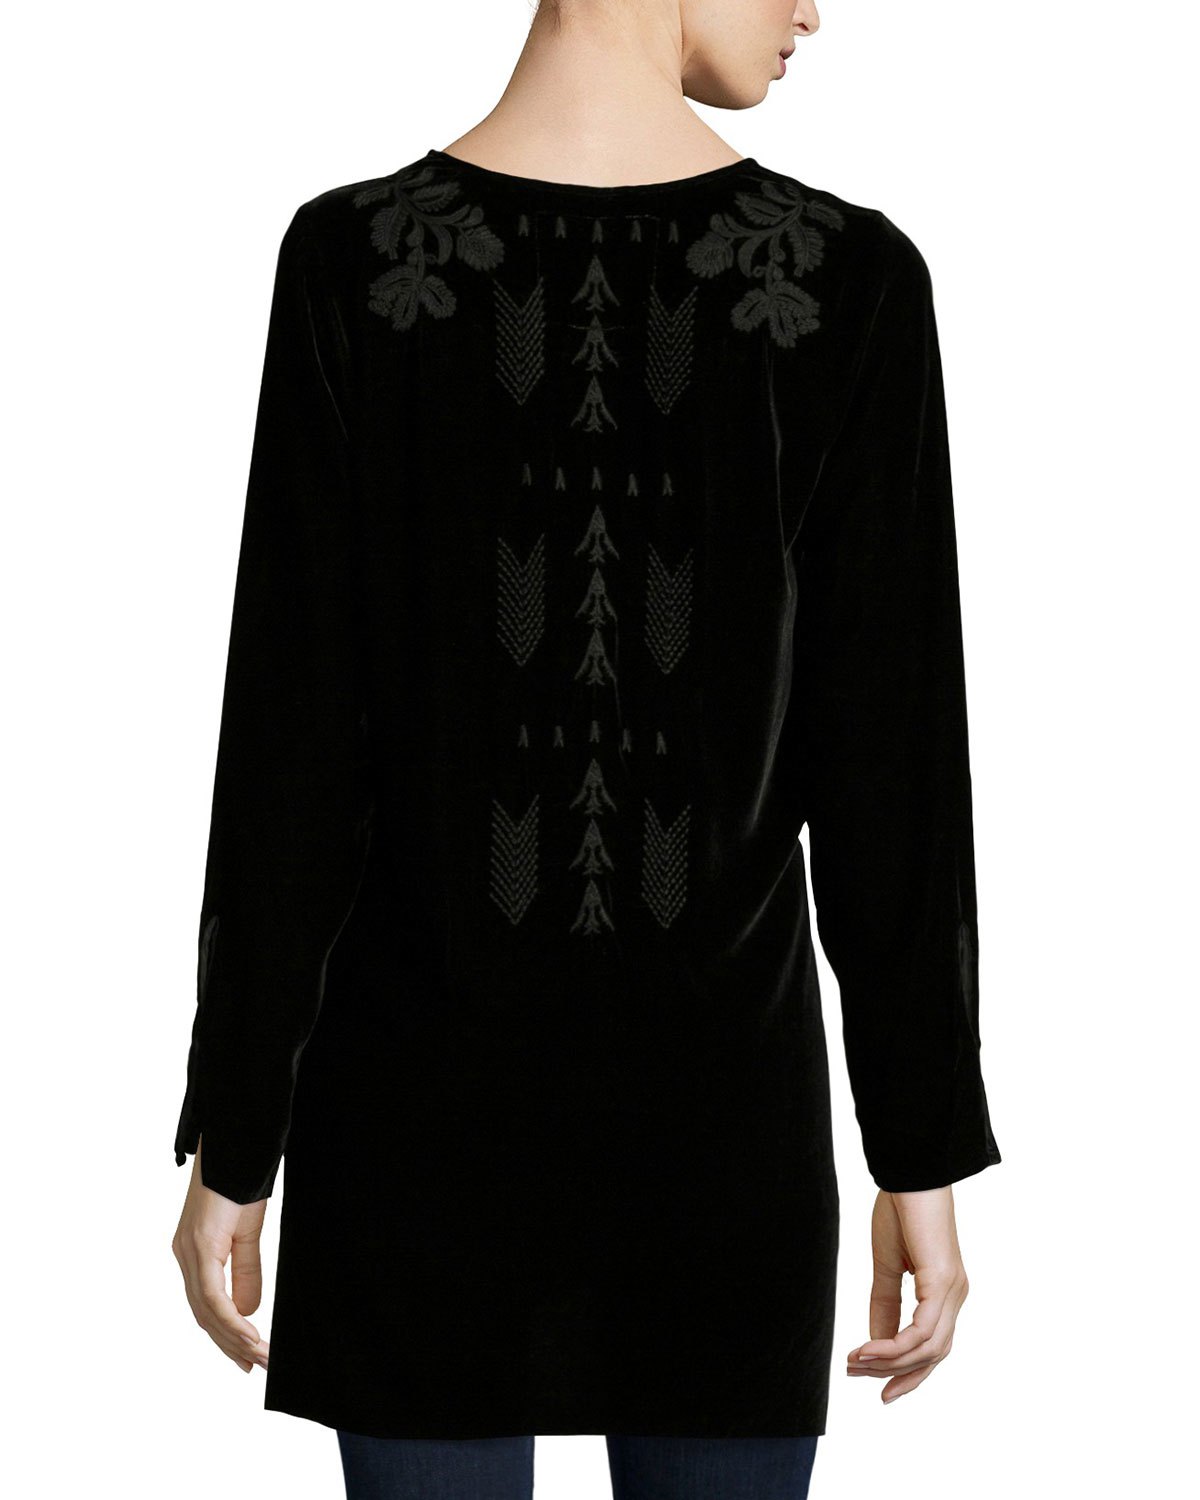 Johnny Was Holland Embroidered Velvet Tunic in Black - Lyst